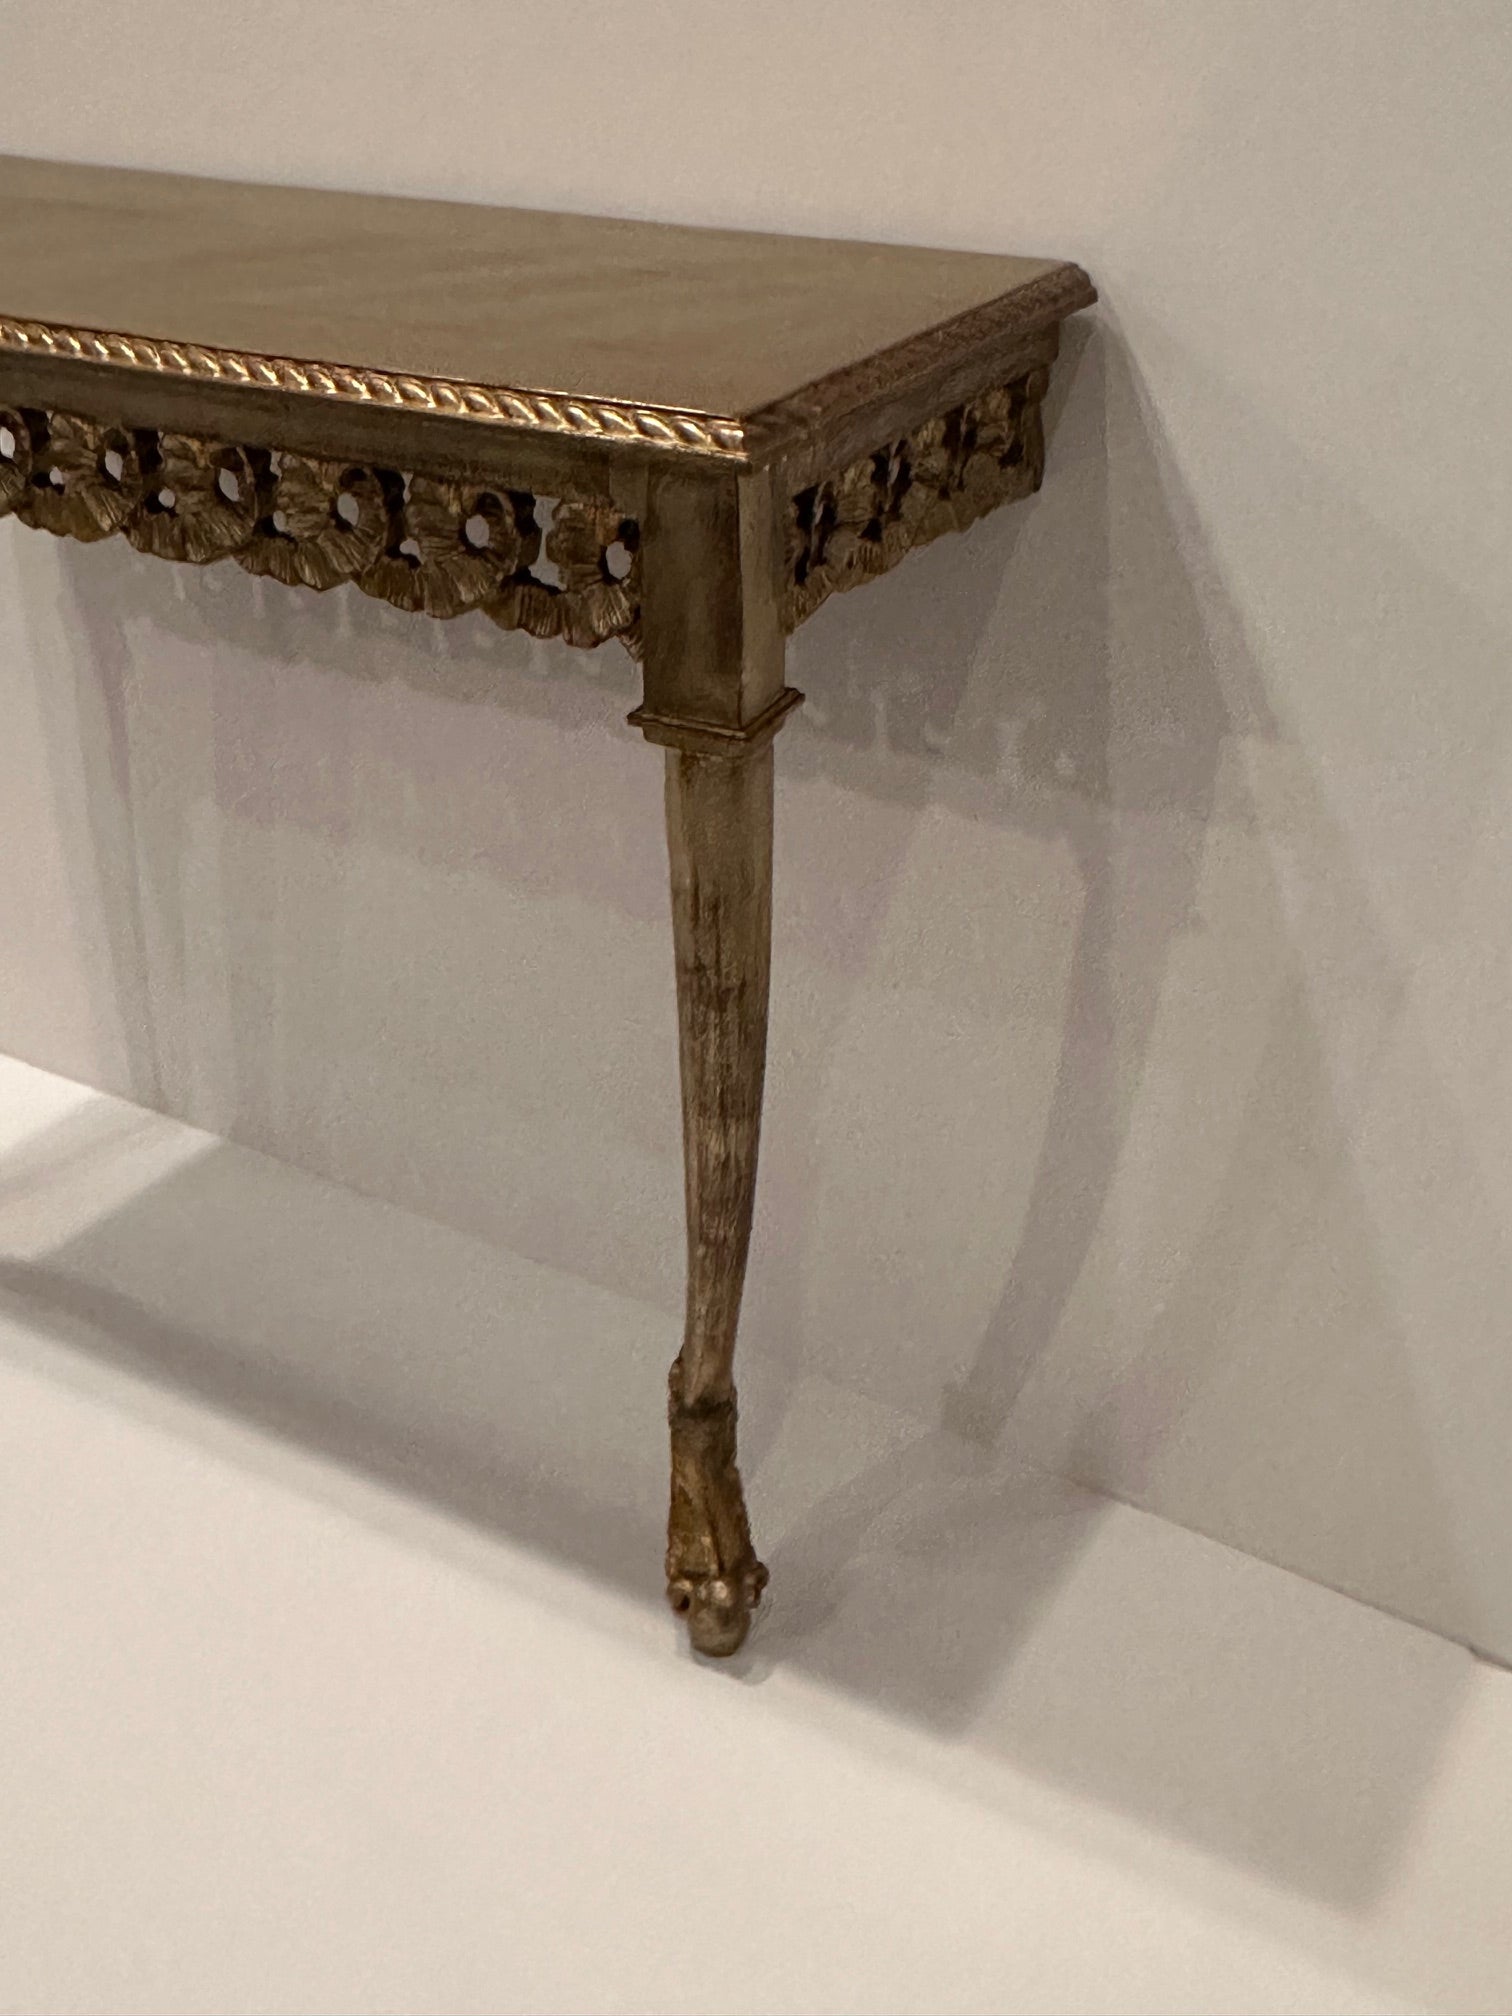 Lovely silver and gold leaf wooden narrow wall mounted console table from Italy having two elegant legs terminating in beautifully designed feet.